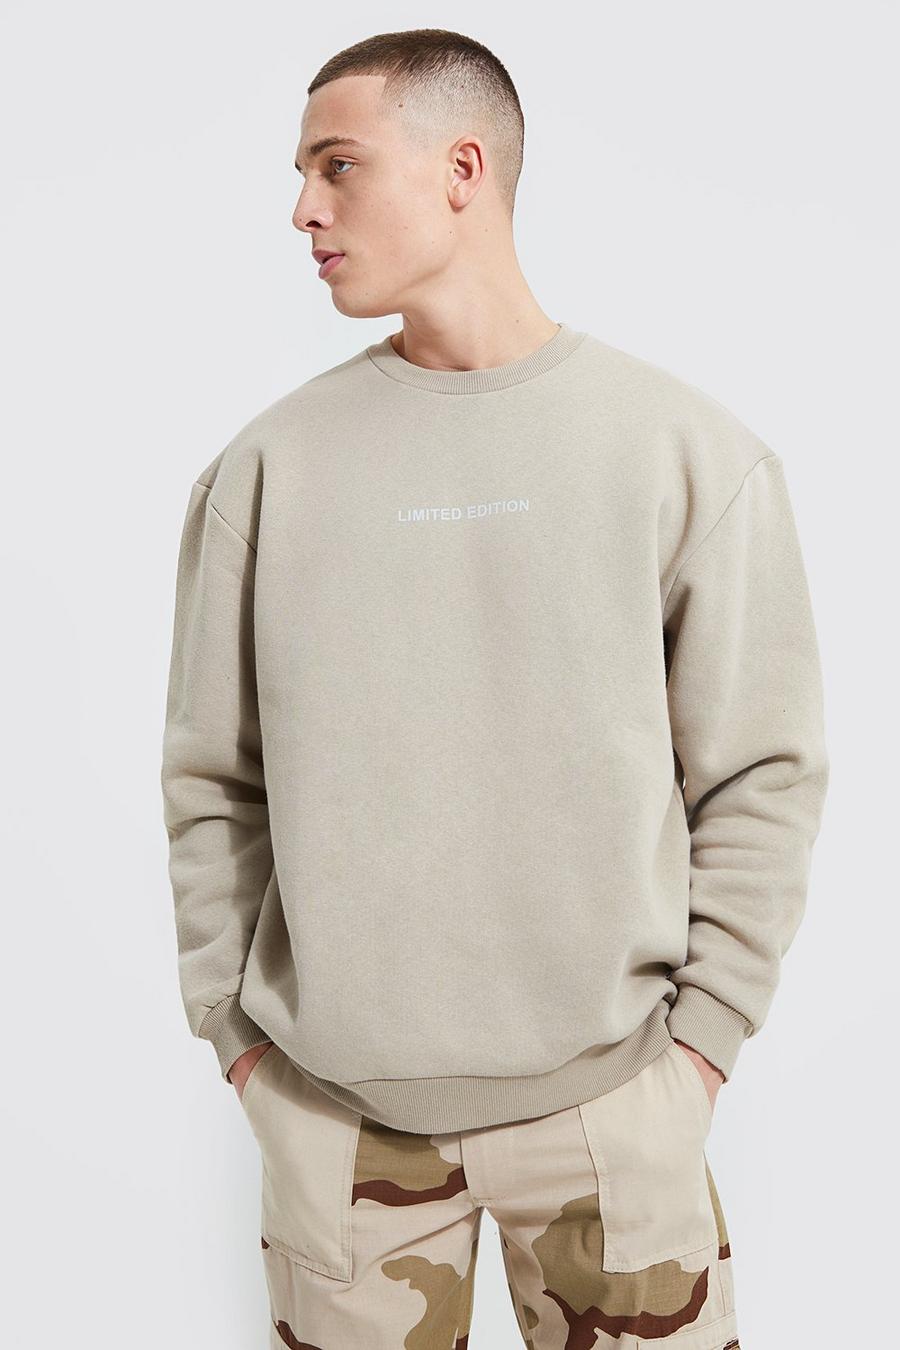 Sweat oversize - Limited Edition, Taupe beige